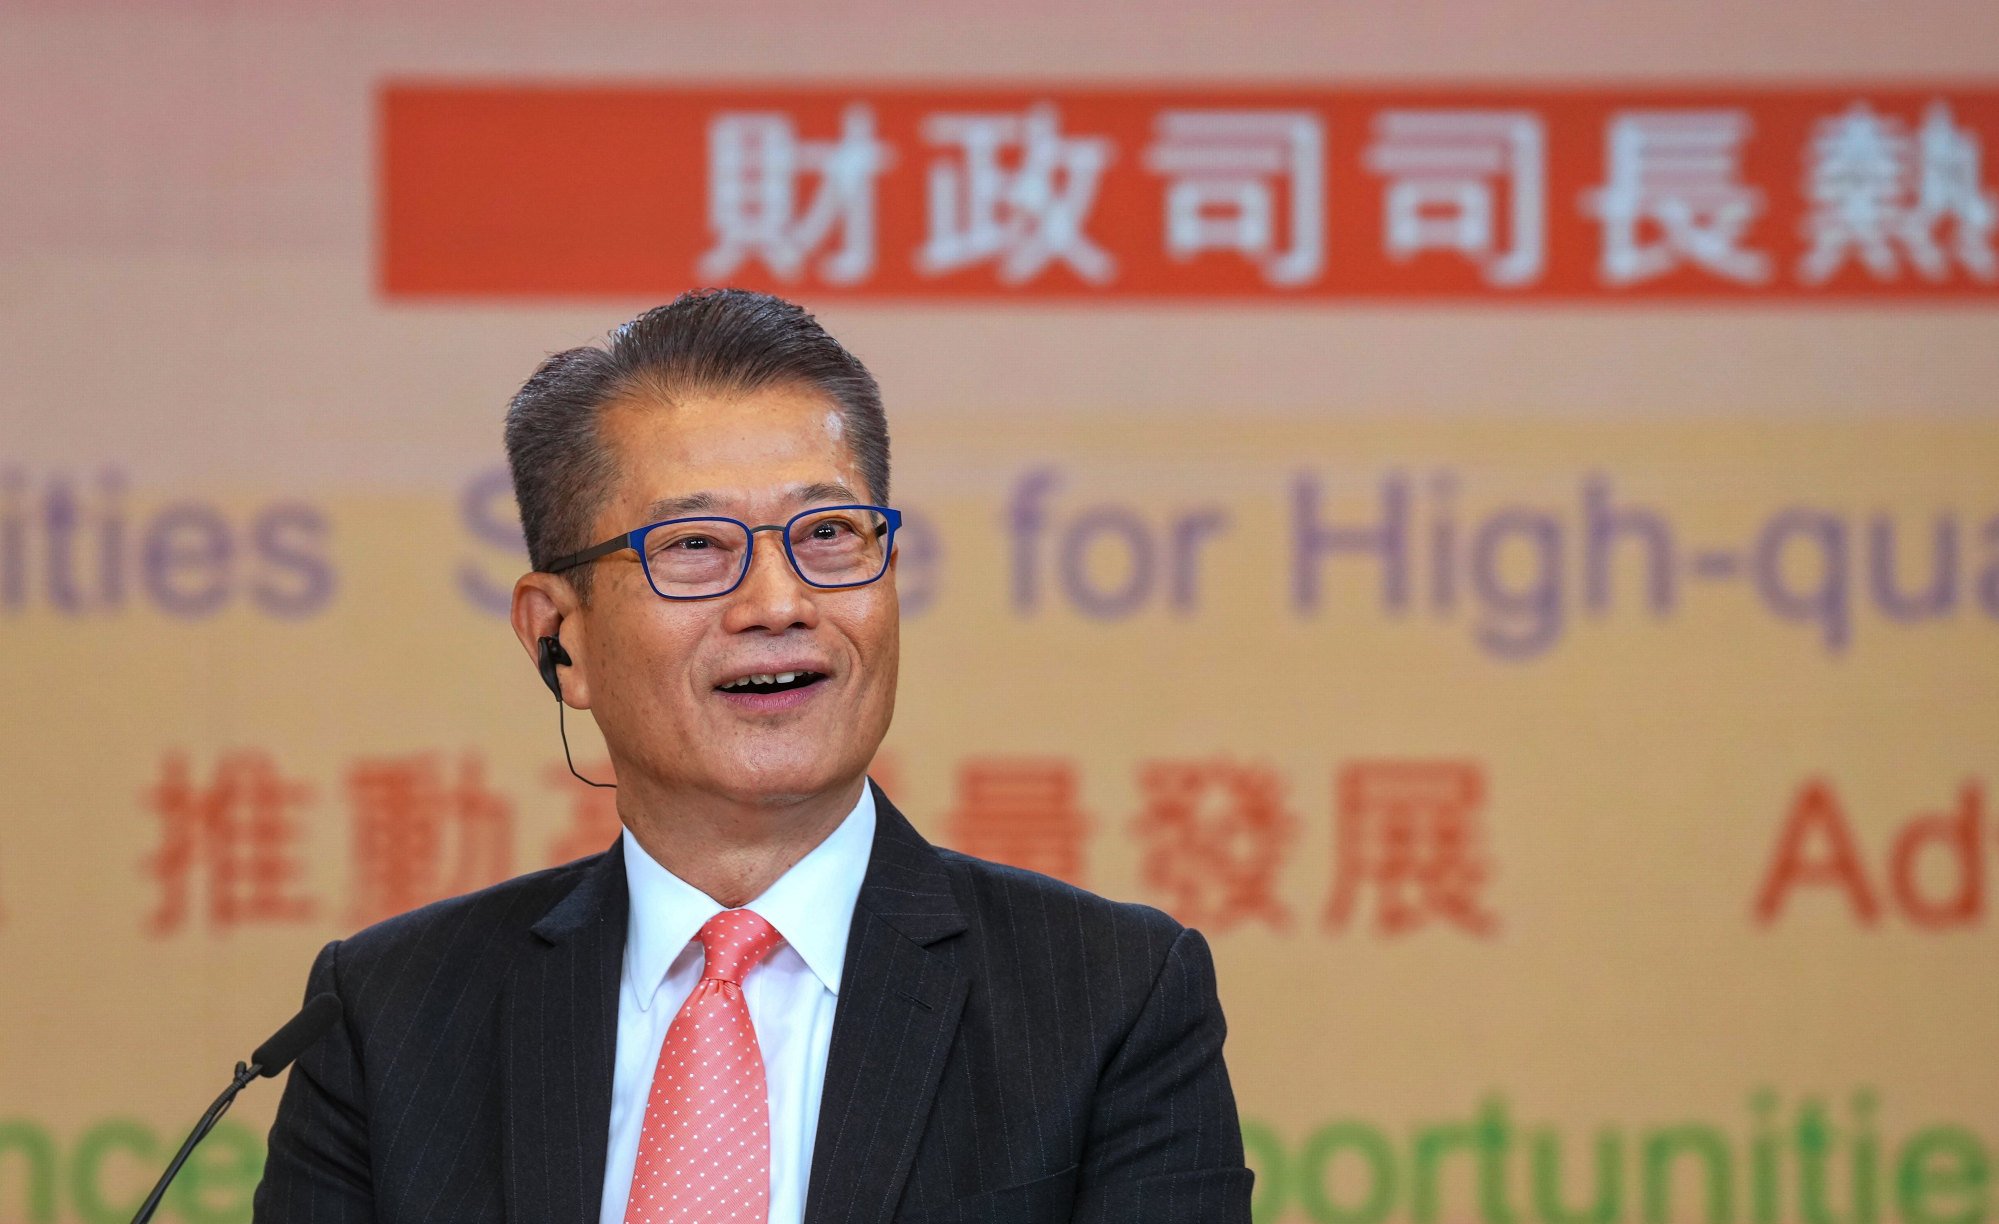 hong kong officials aim to lure medium-sized firms in mainland china by touting city’s professional services: finance chief